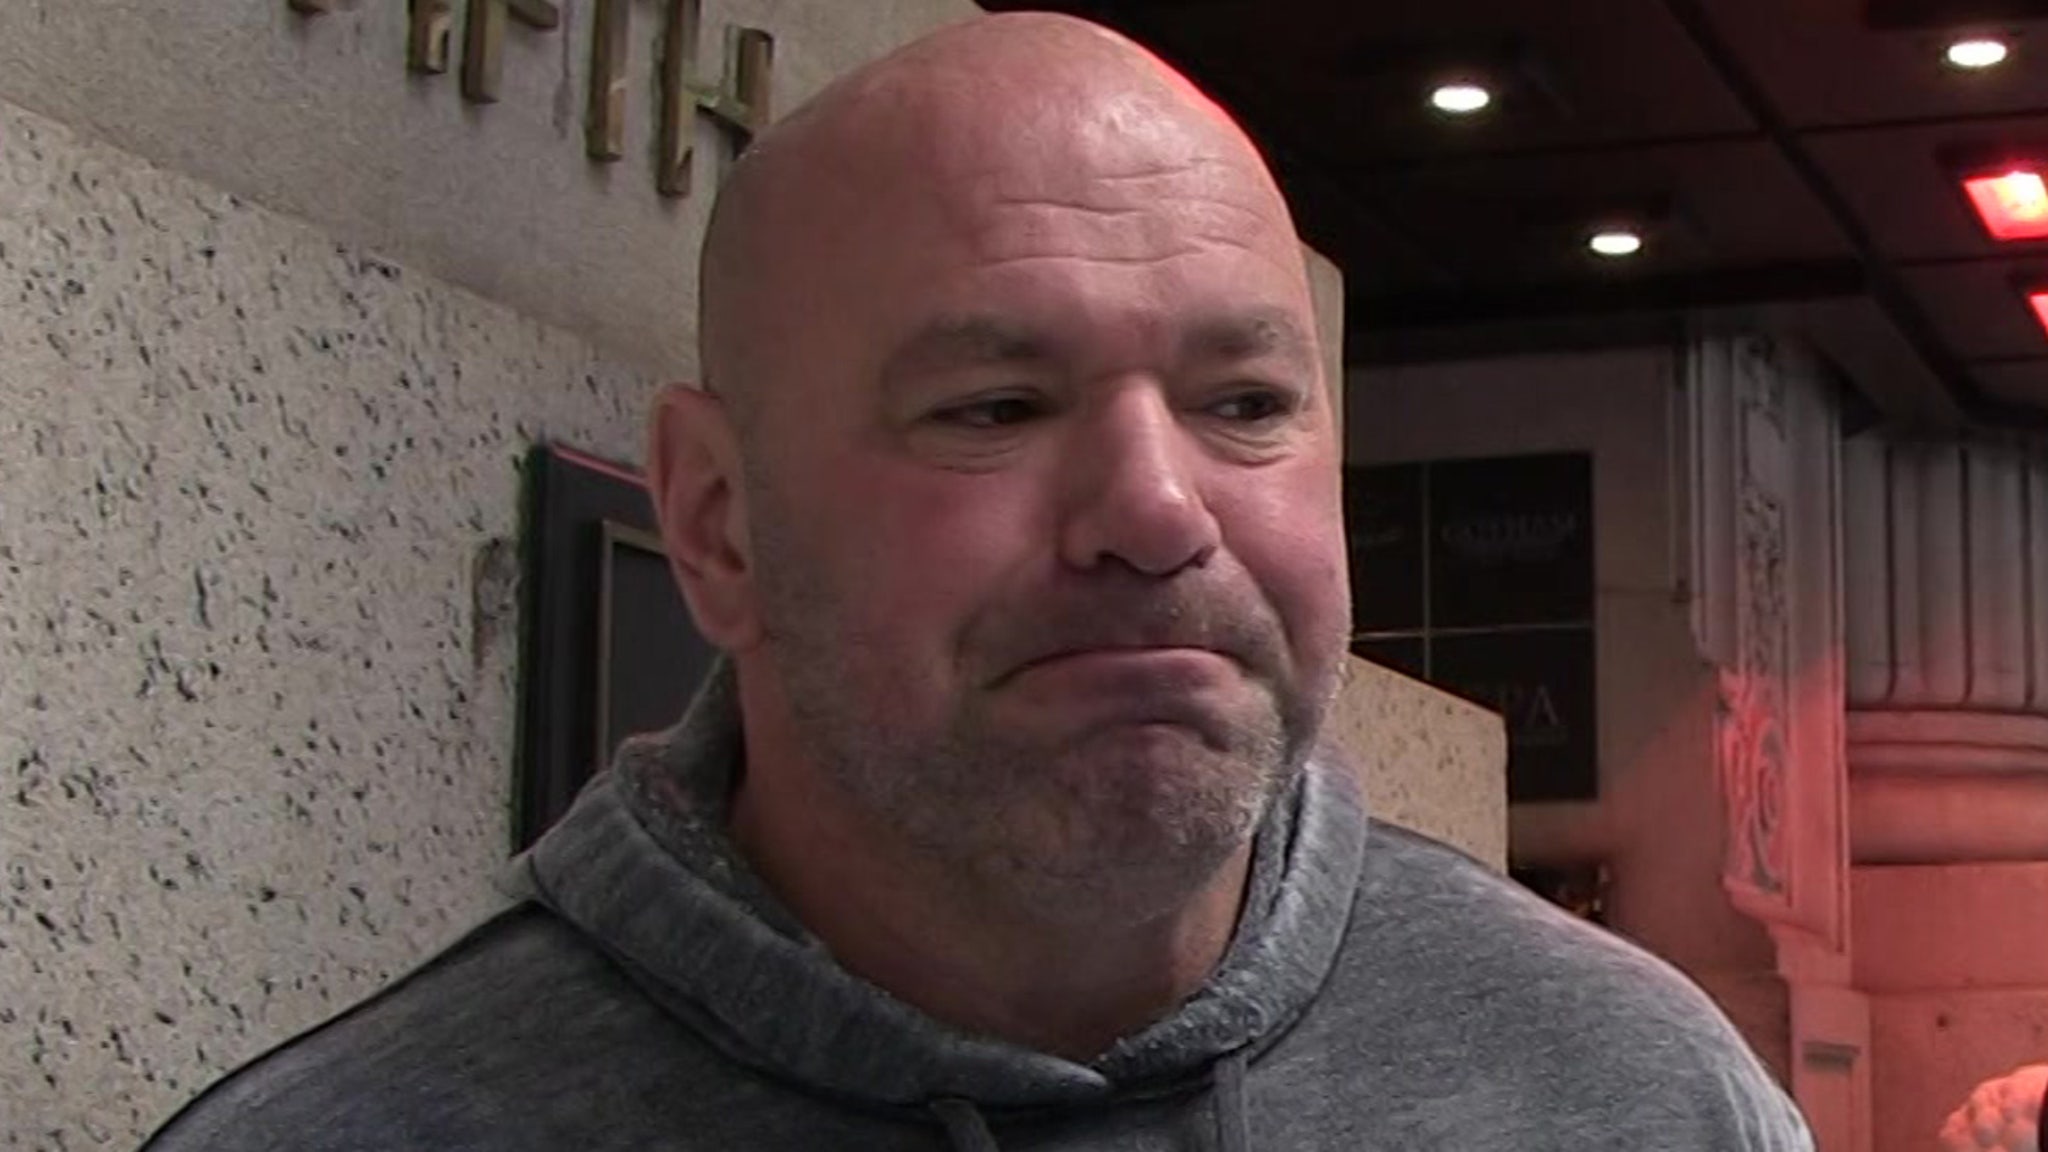 UFC's Dana White Tests Positive For COVID, Consulted Joe Rogan